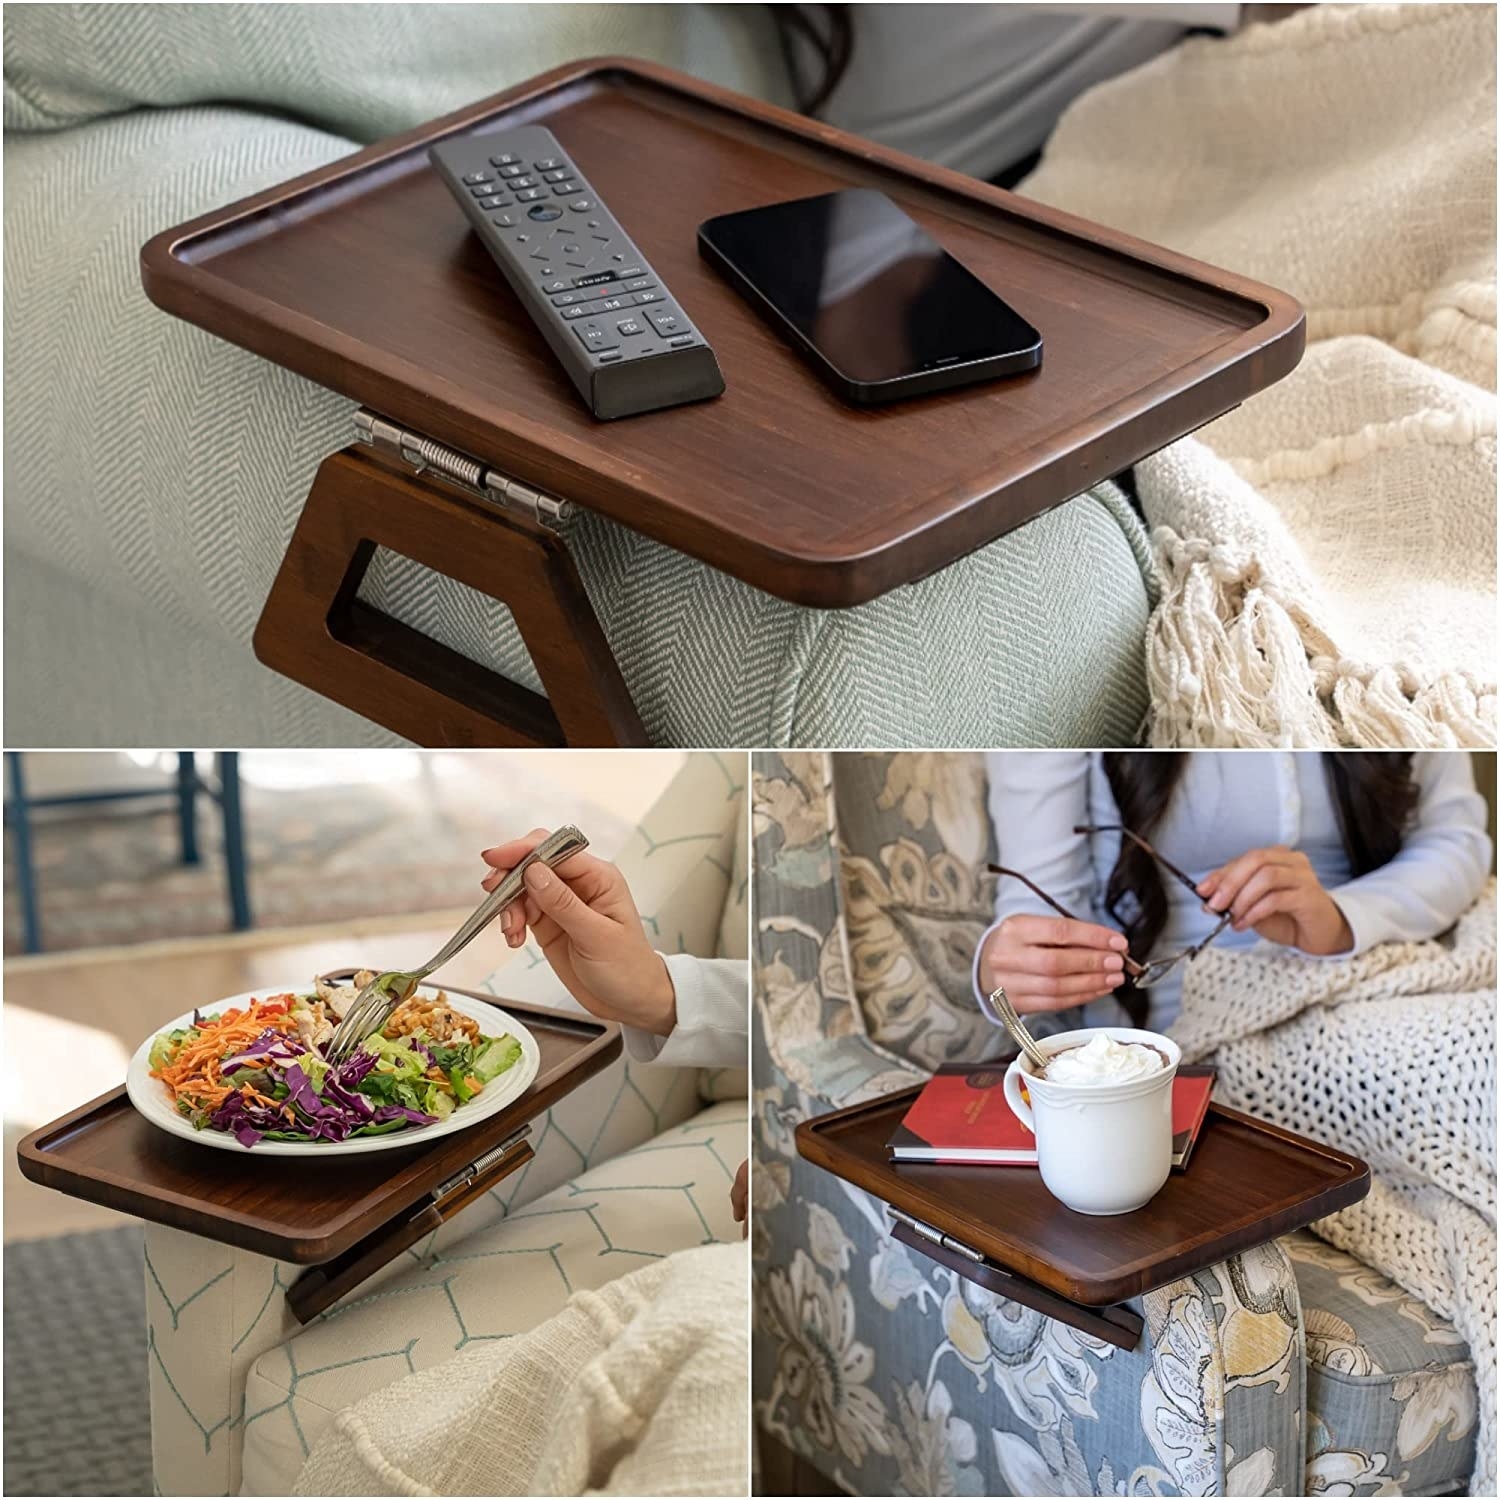 The tray being used on sofa arms to hold drinks, food, and remotes